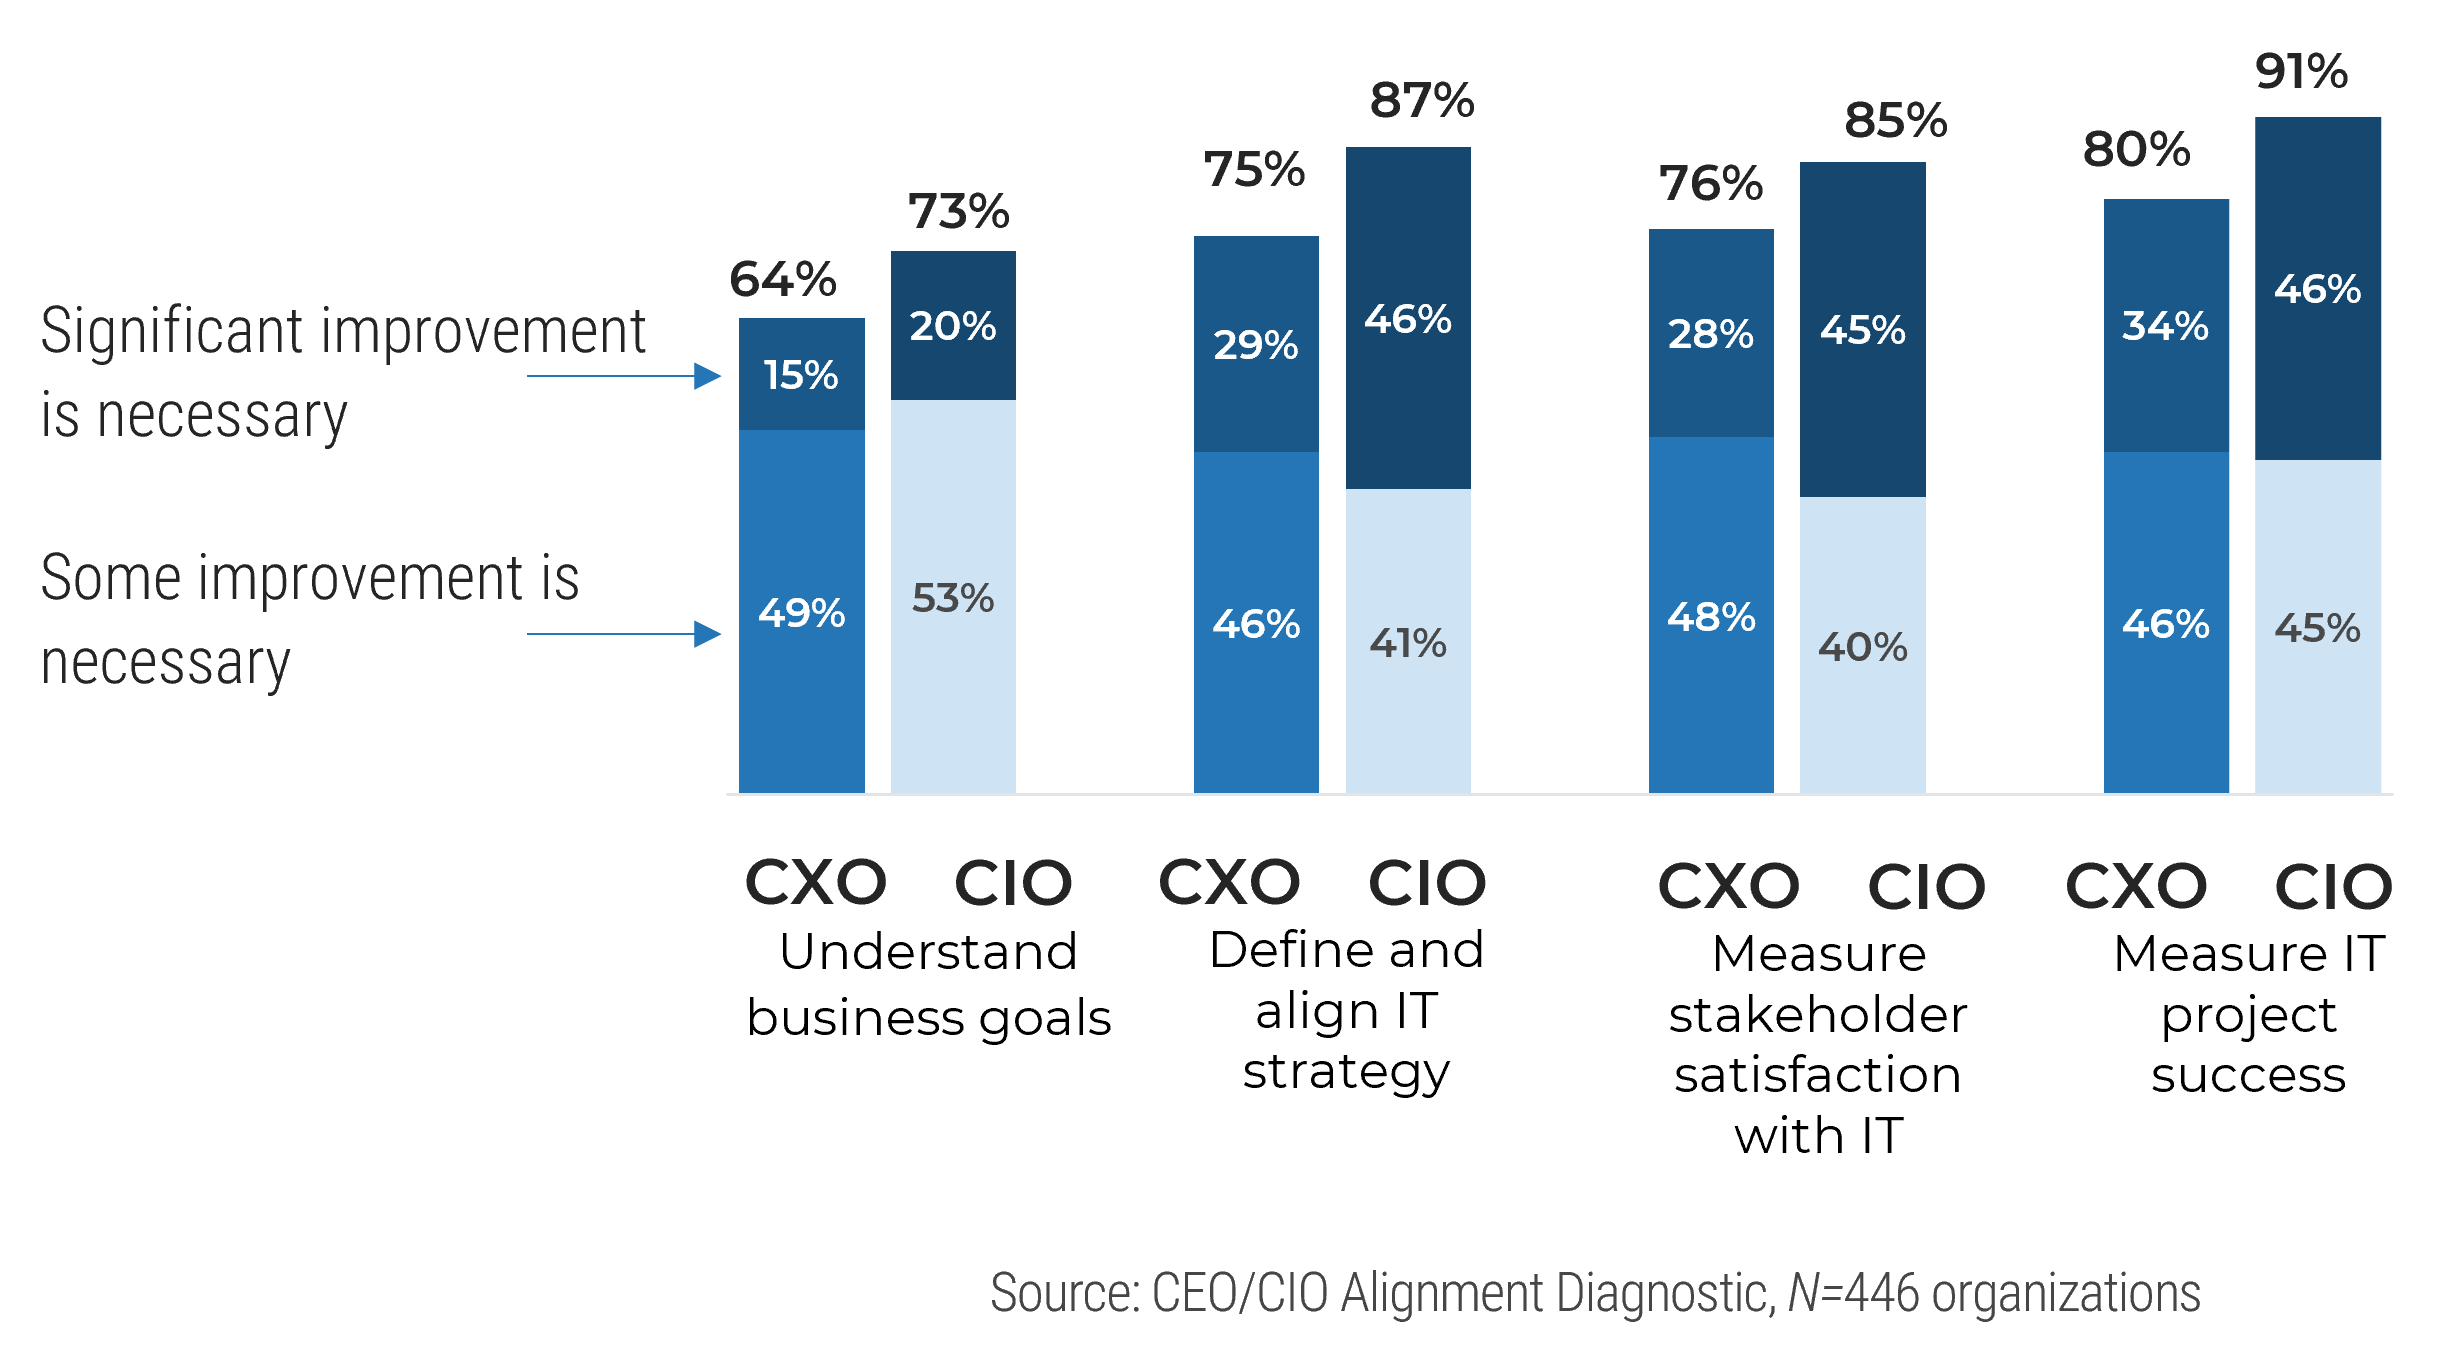 Bar chart comparing 'CXO' and 'CIO' responses to multiple areas one whether they need significant improvement or only some improvement. Areas in question are 'Understand Business Goals', 'Define and align IT strategy', 'Measure stakeholder satisfaction with IT', and 'Measure IT project success'. Source: CEO/CIO Alignment Diagnostic, N=446 organizations.